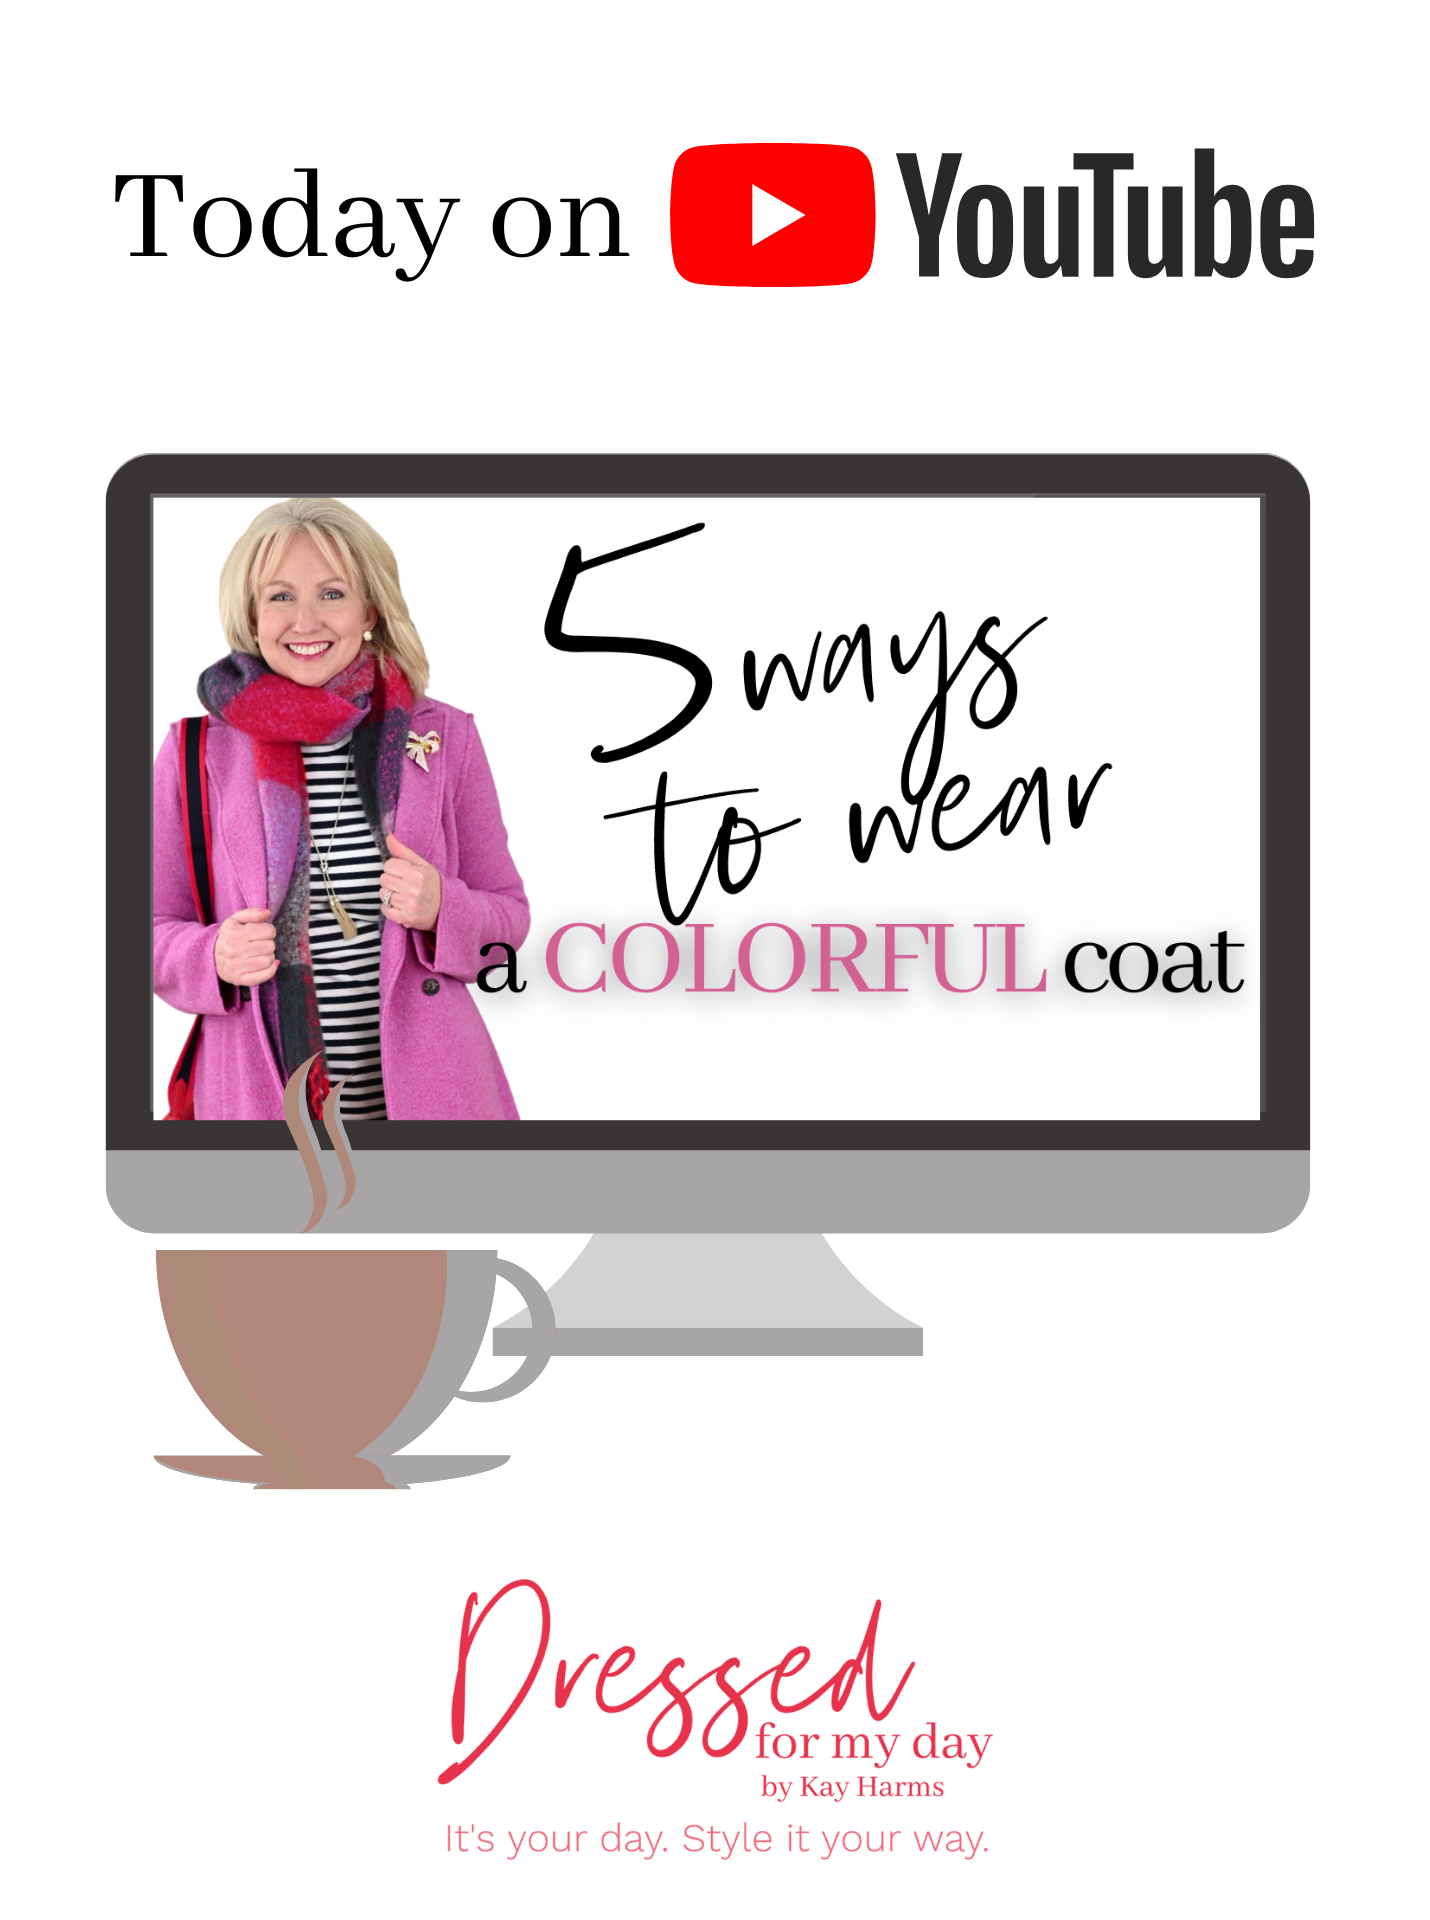 5 Ways to Wear a Colorful Coat